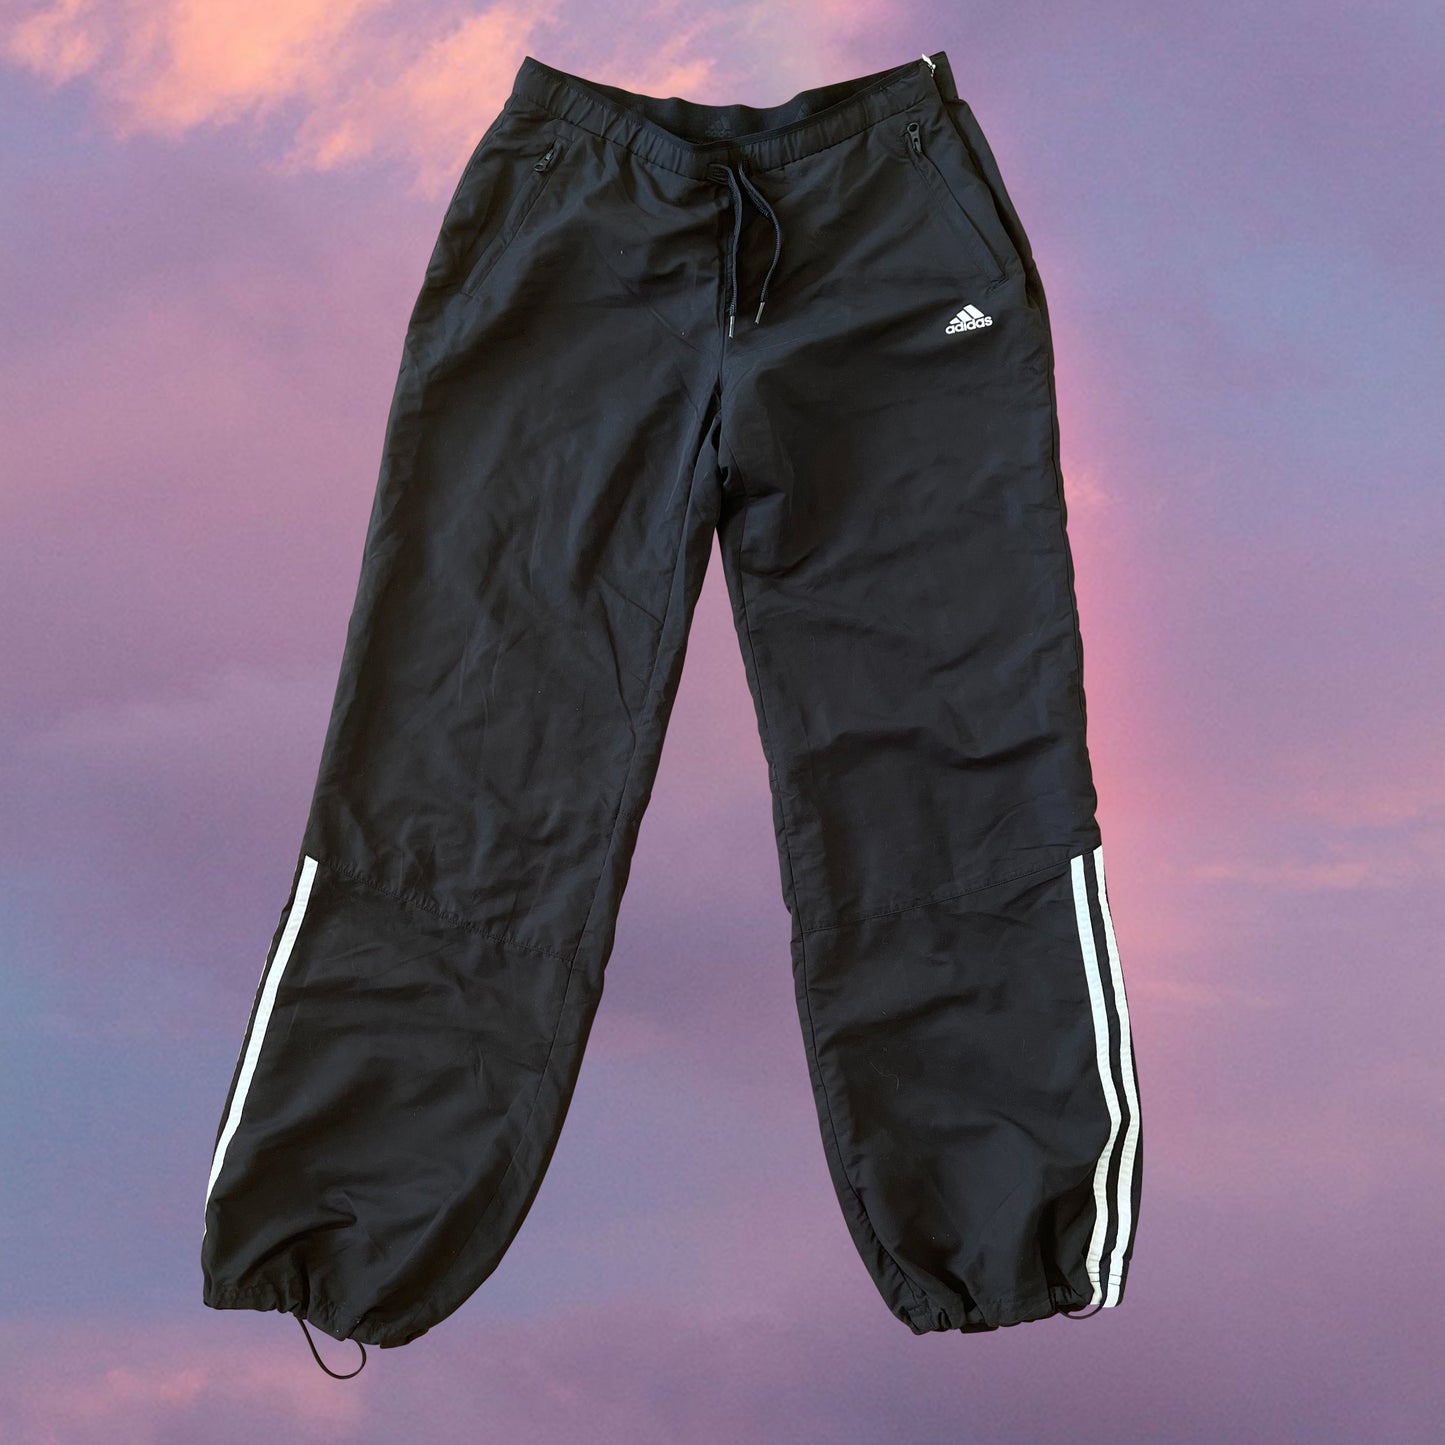 Vintage 90's Adidas Sporty Black Baggy Track Pants with Toggle